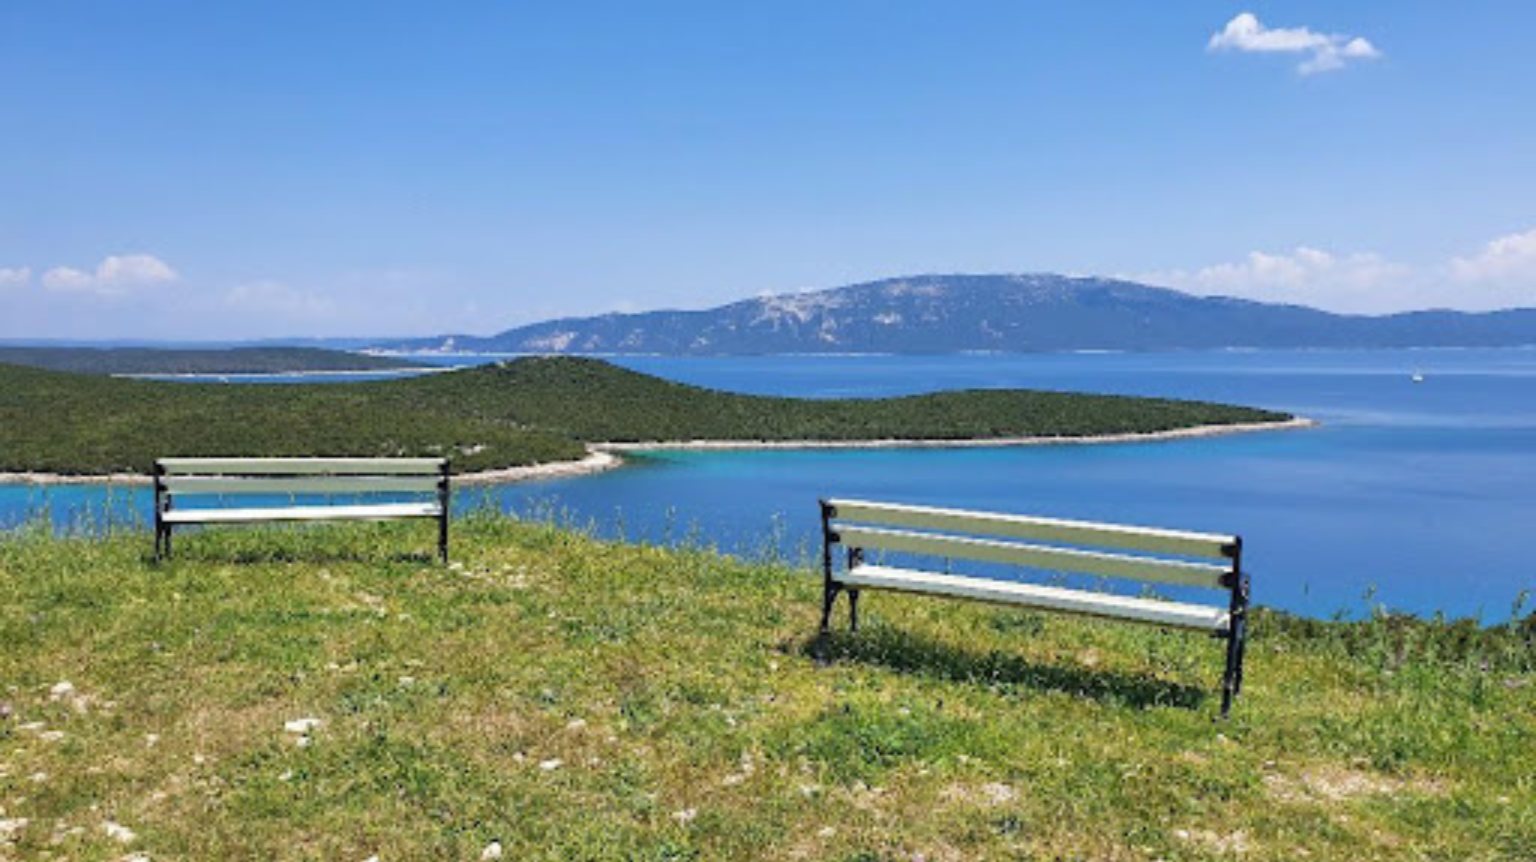 Free and secluded anchorages in Croatia